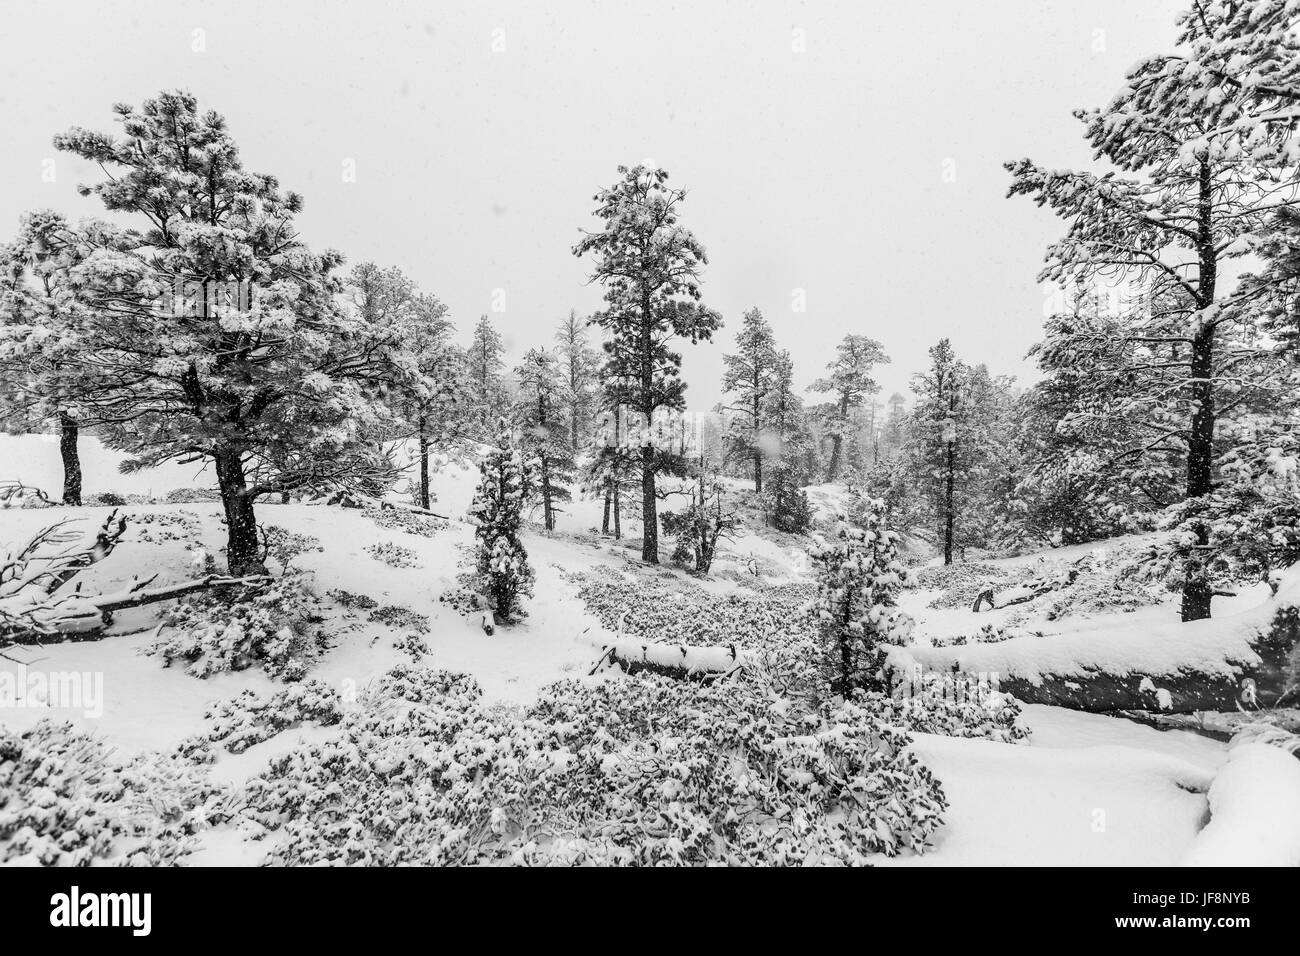 Heavy winter snowfall in progress at Bryce Canyon National Park in black and white. Stock Photo